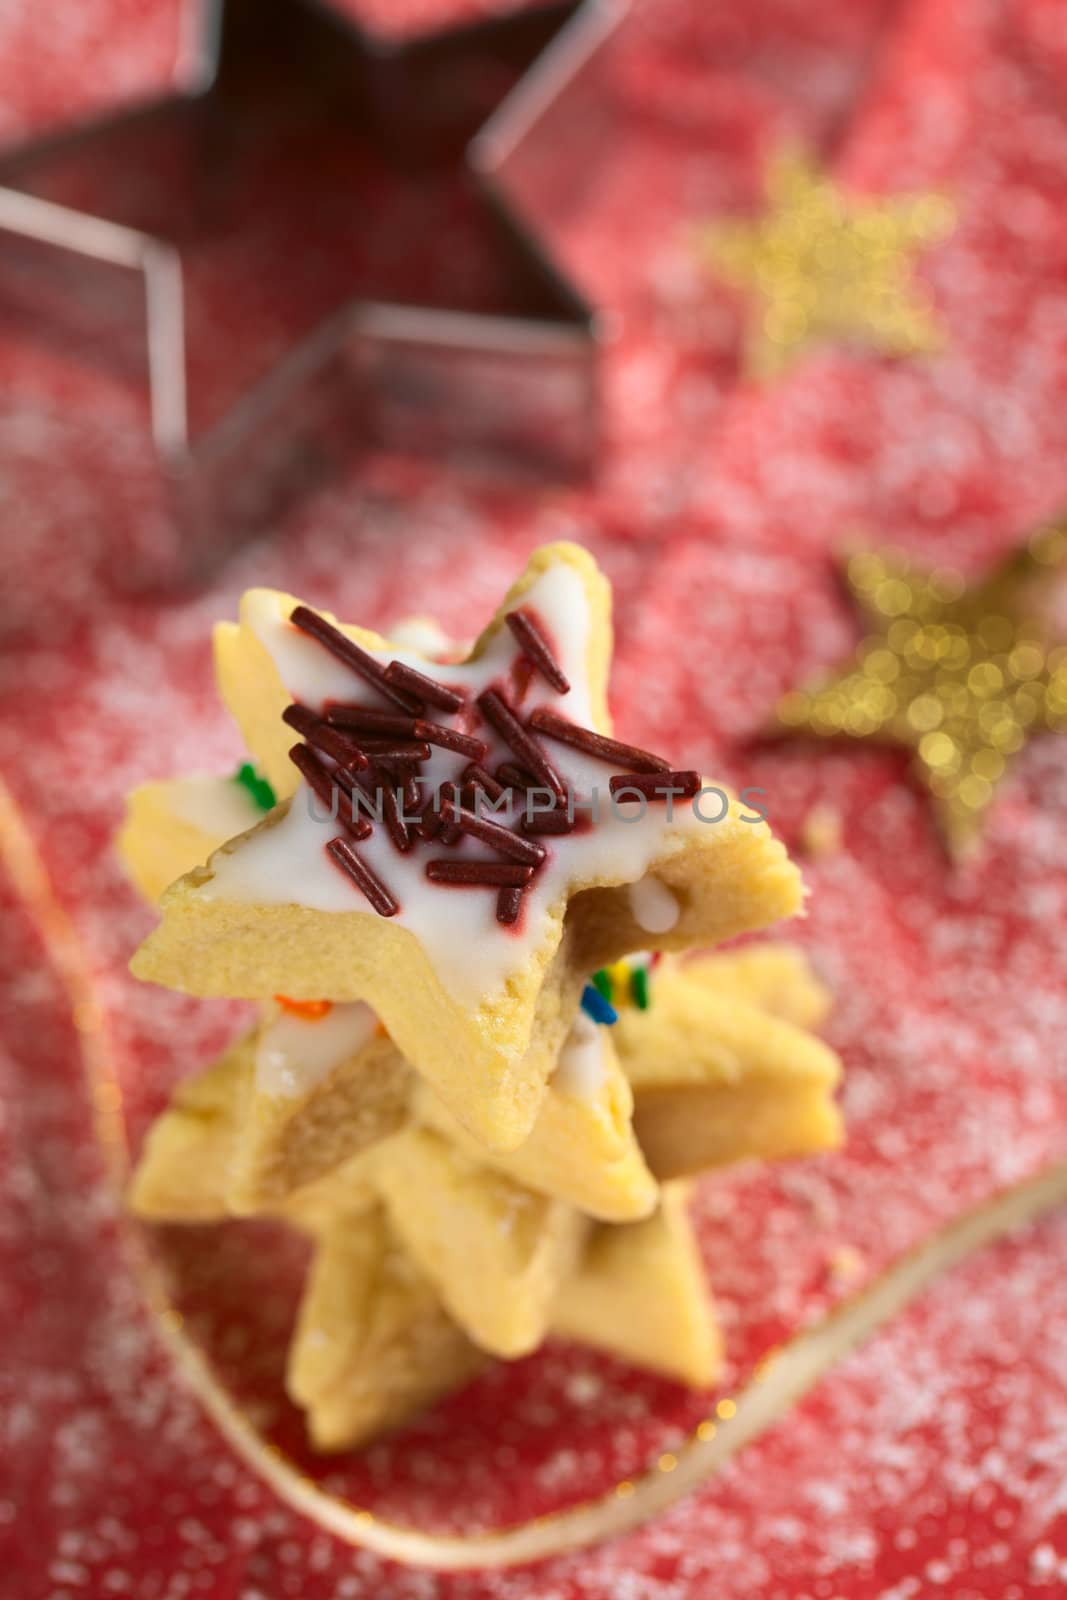 Star-Shaped Cookie with Chocolate Sprinkles by ildi